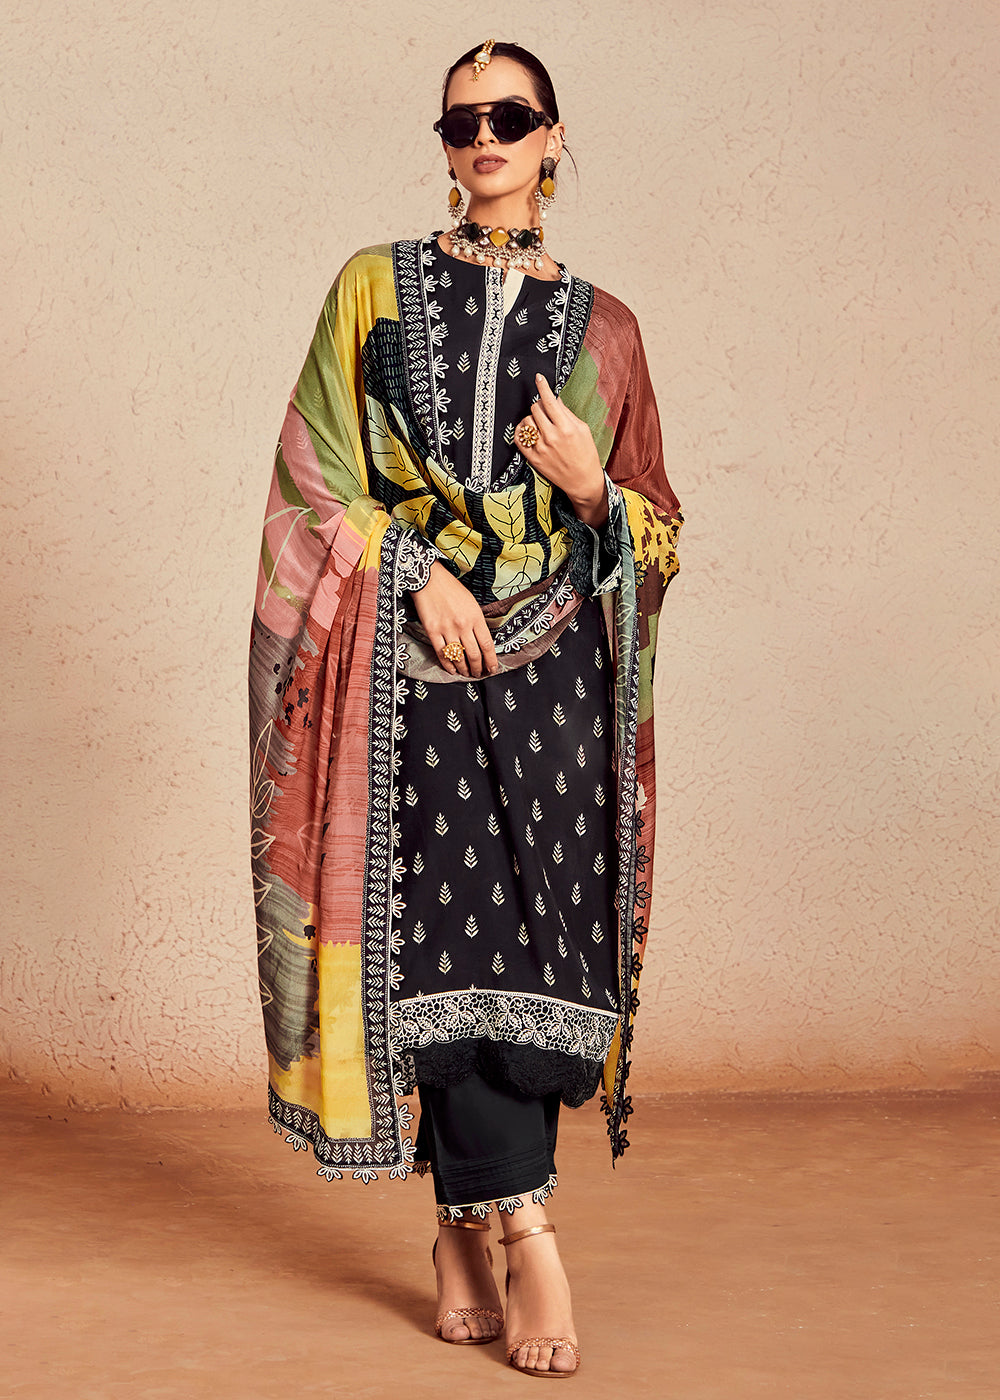 Buy Now Muslin Cotton Black Digital Print & Embroidered Salwar Suit Online in USA, UK, Canada, Germany, Australia & Worldwide at Empress Clothing.